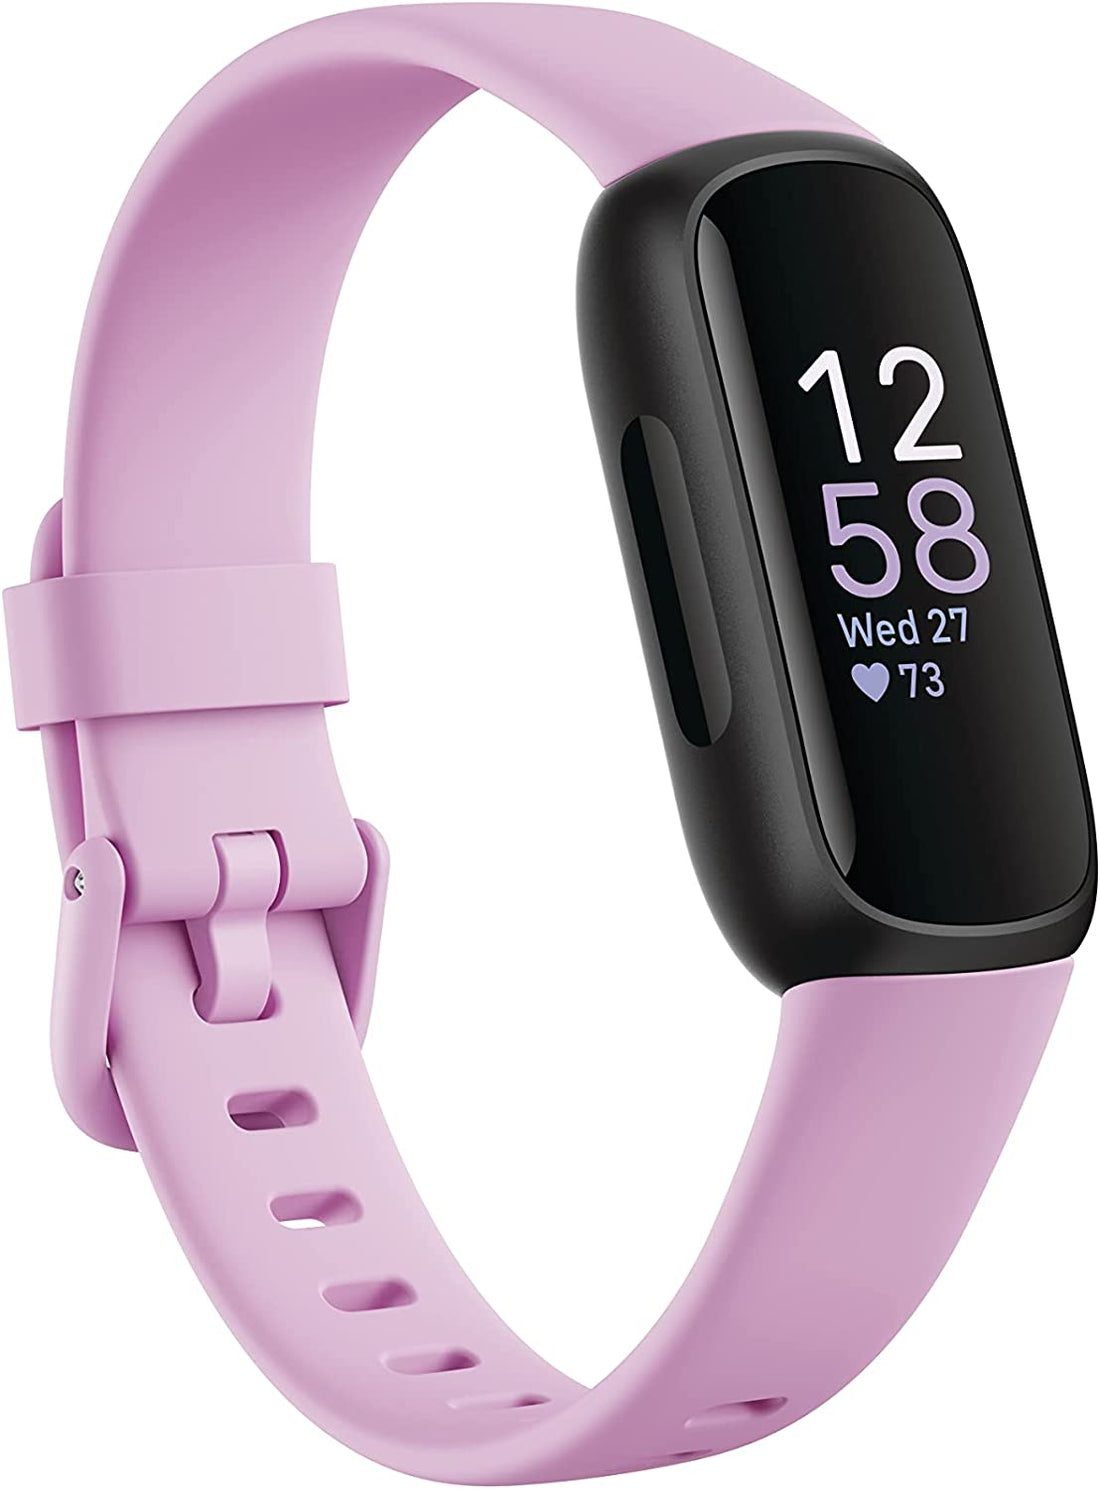 Fitbit Inspire 3 Fitness Tracker w/Stress Management - Lilac Bliss (Refurbished)